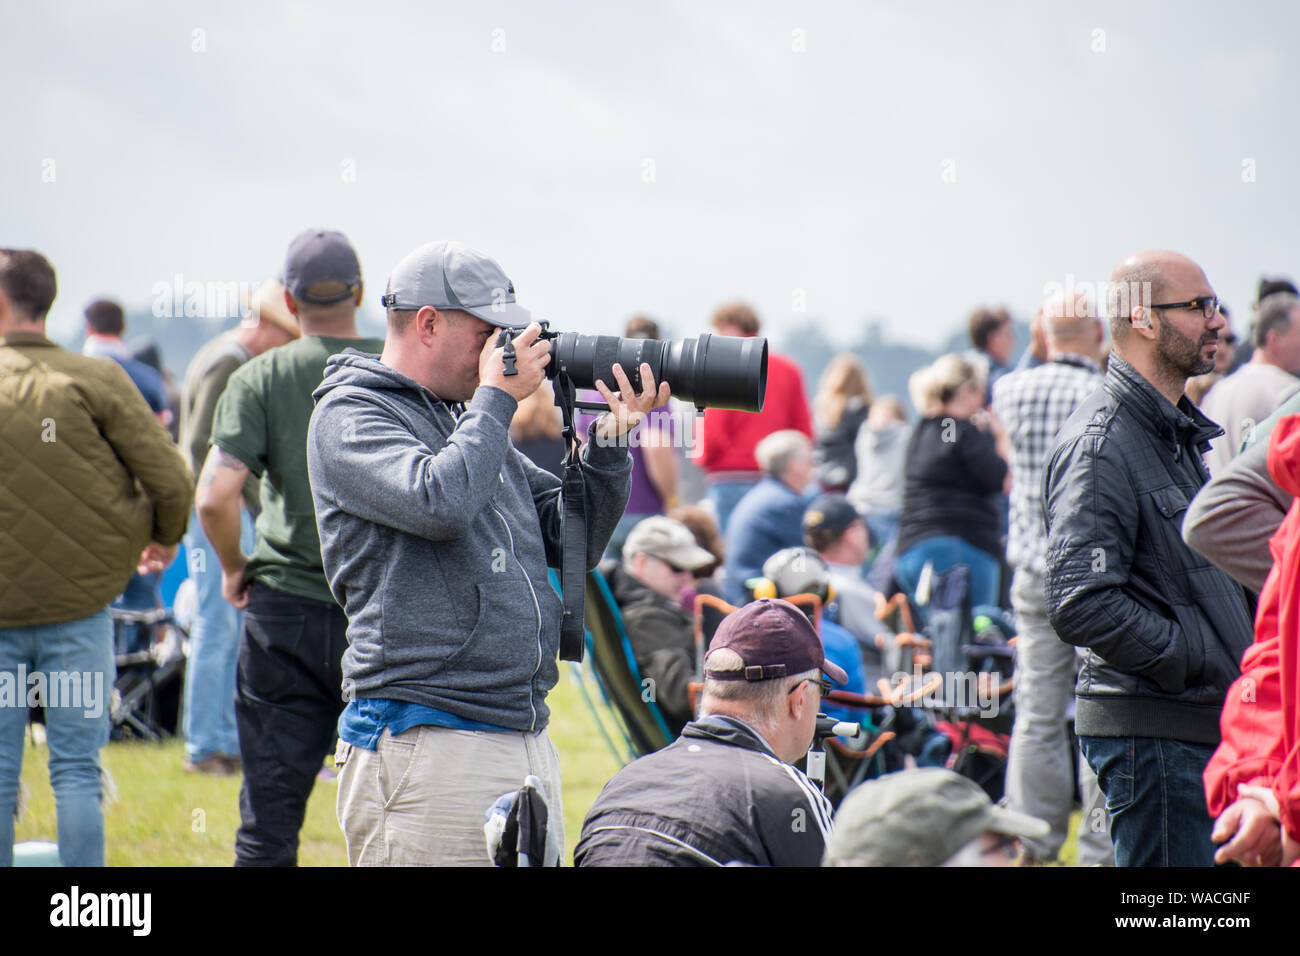 A photographer with a large lens shooting at an event with crowd around (EDITORIAL USE ONLY) Stock Photo